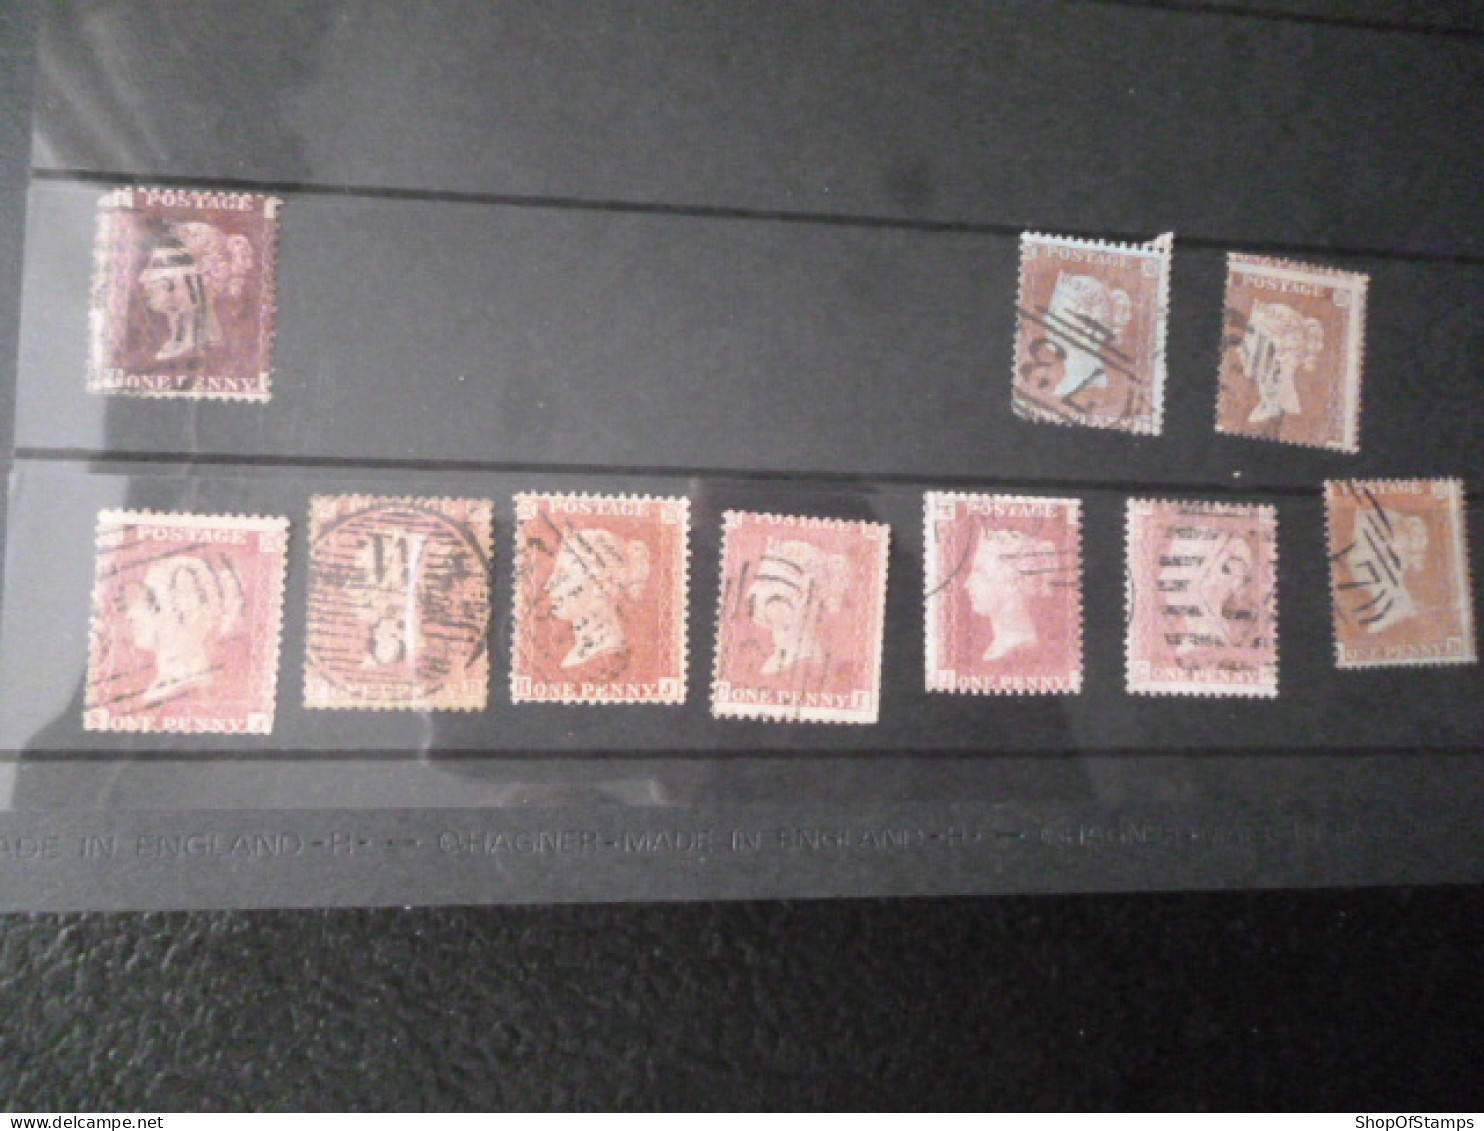 GREAT BRITAIN SG RED PENNY IMPERF Only 1 STAMP [ SELECT ONE AND MENTION ROW AND Stamp L To R] - ....-1951 Pre Elizabeth II